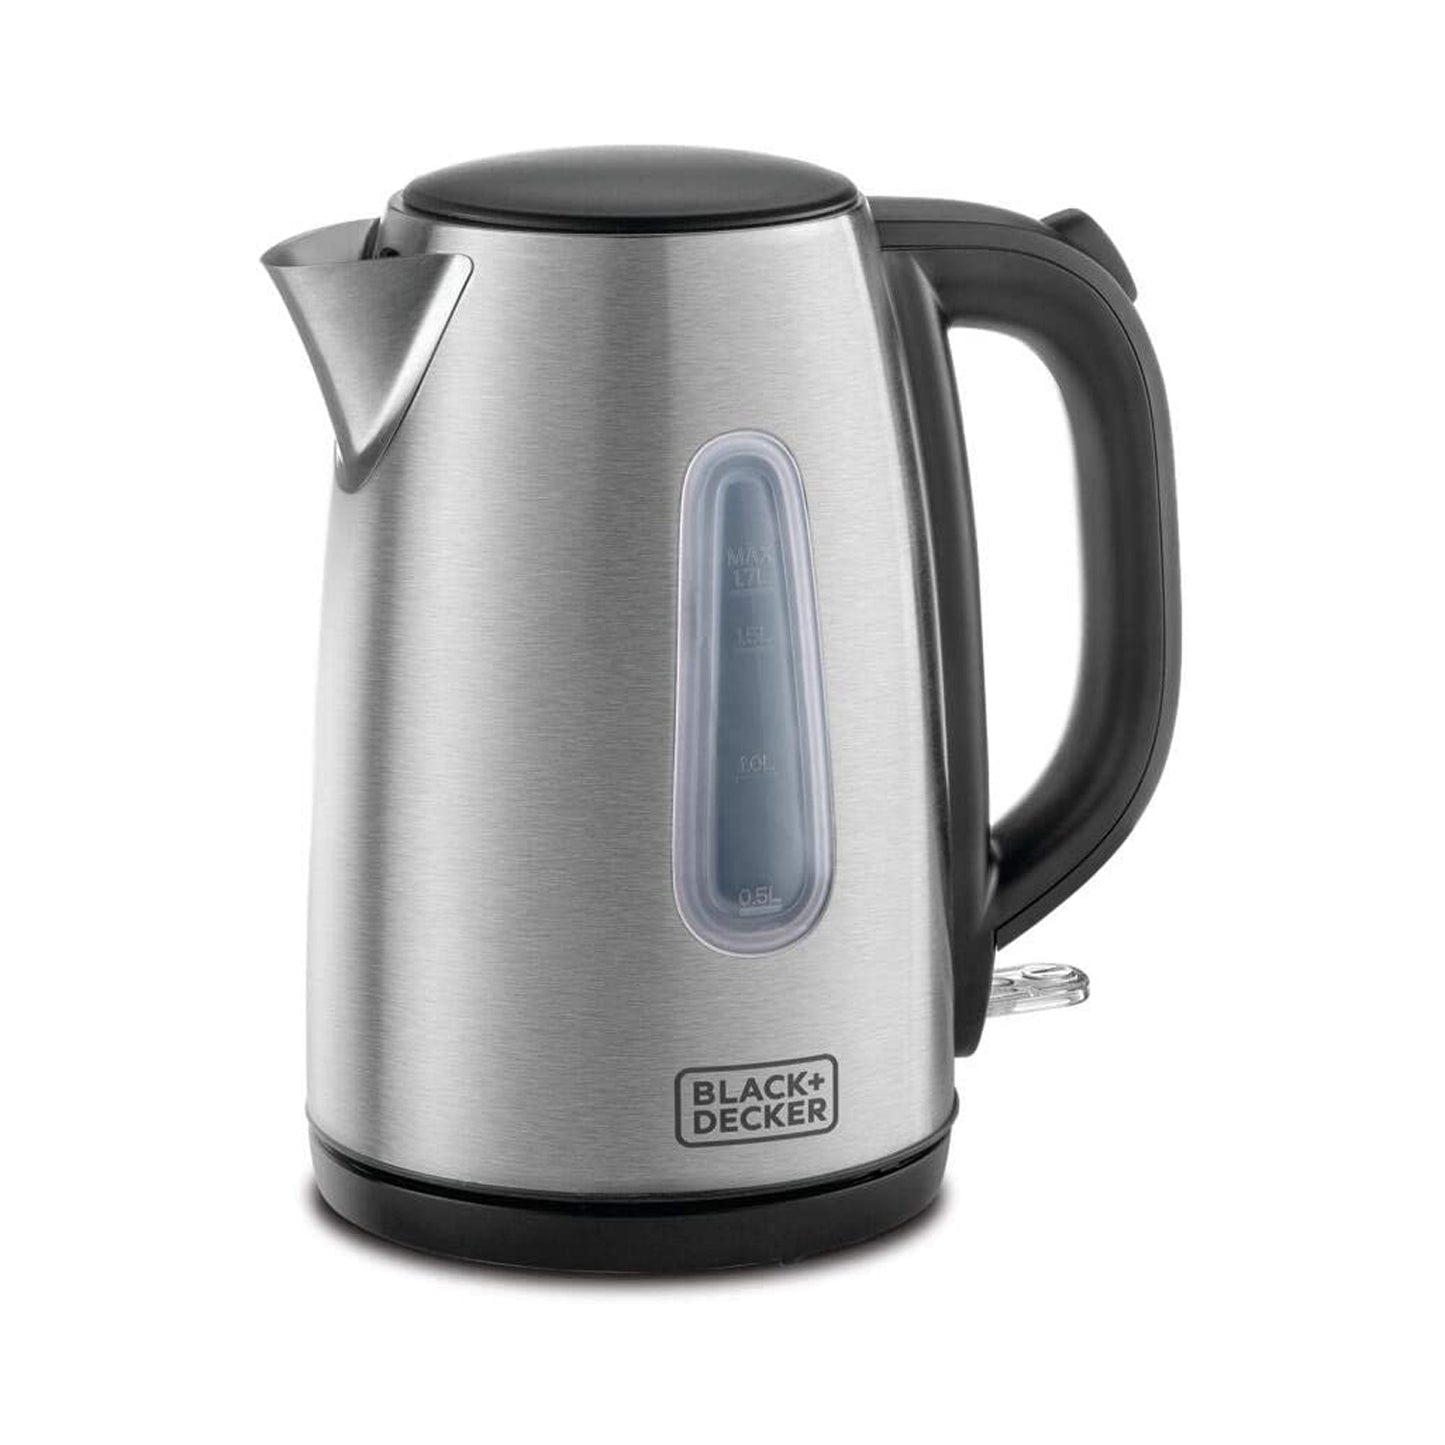 BLACK+DECKER 2200W 1.7L Cordless Electric Kettle With Water-Level Indicator, Removable Filter, Auto Shut-Off And Stainless Steel Body, Perfect for Warm Beverages JC450 2 Years Warranty